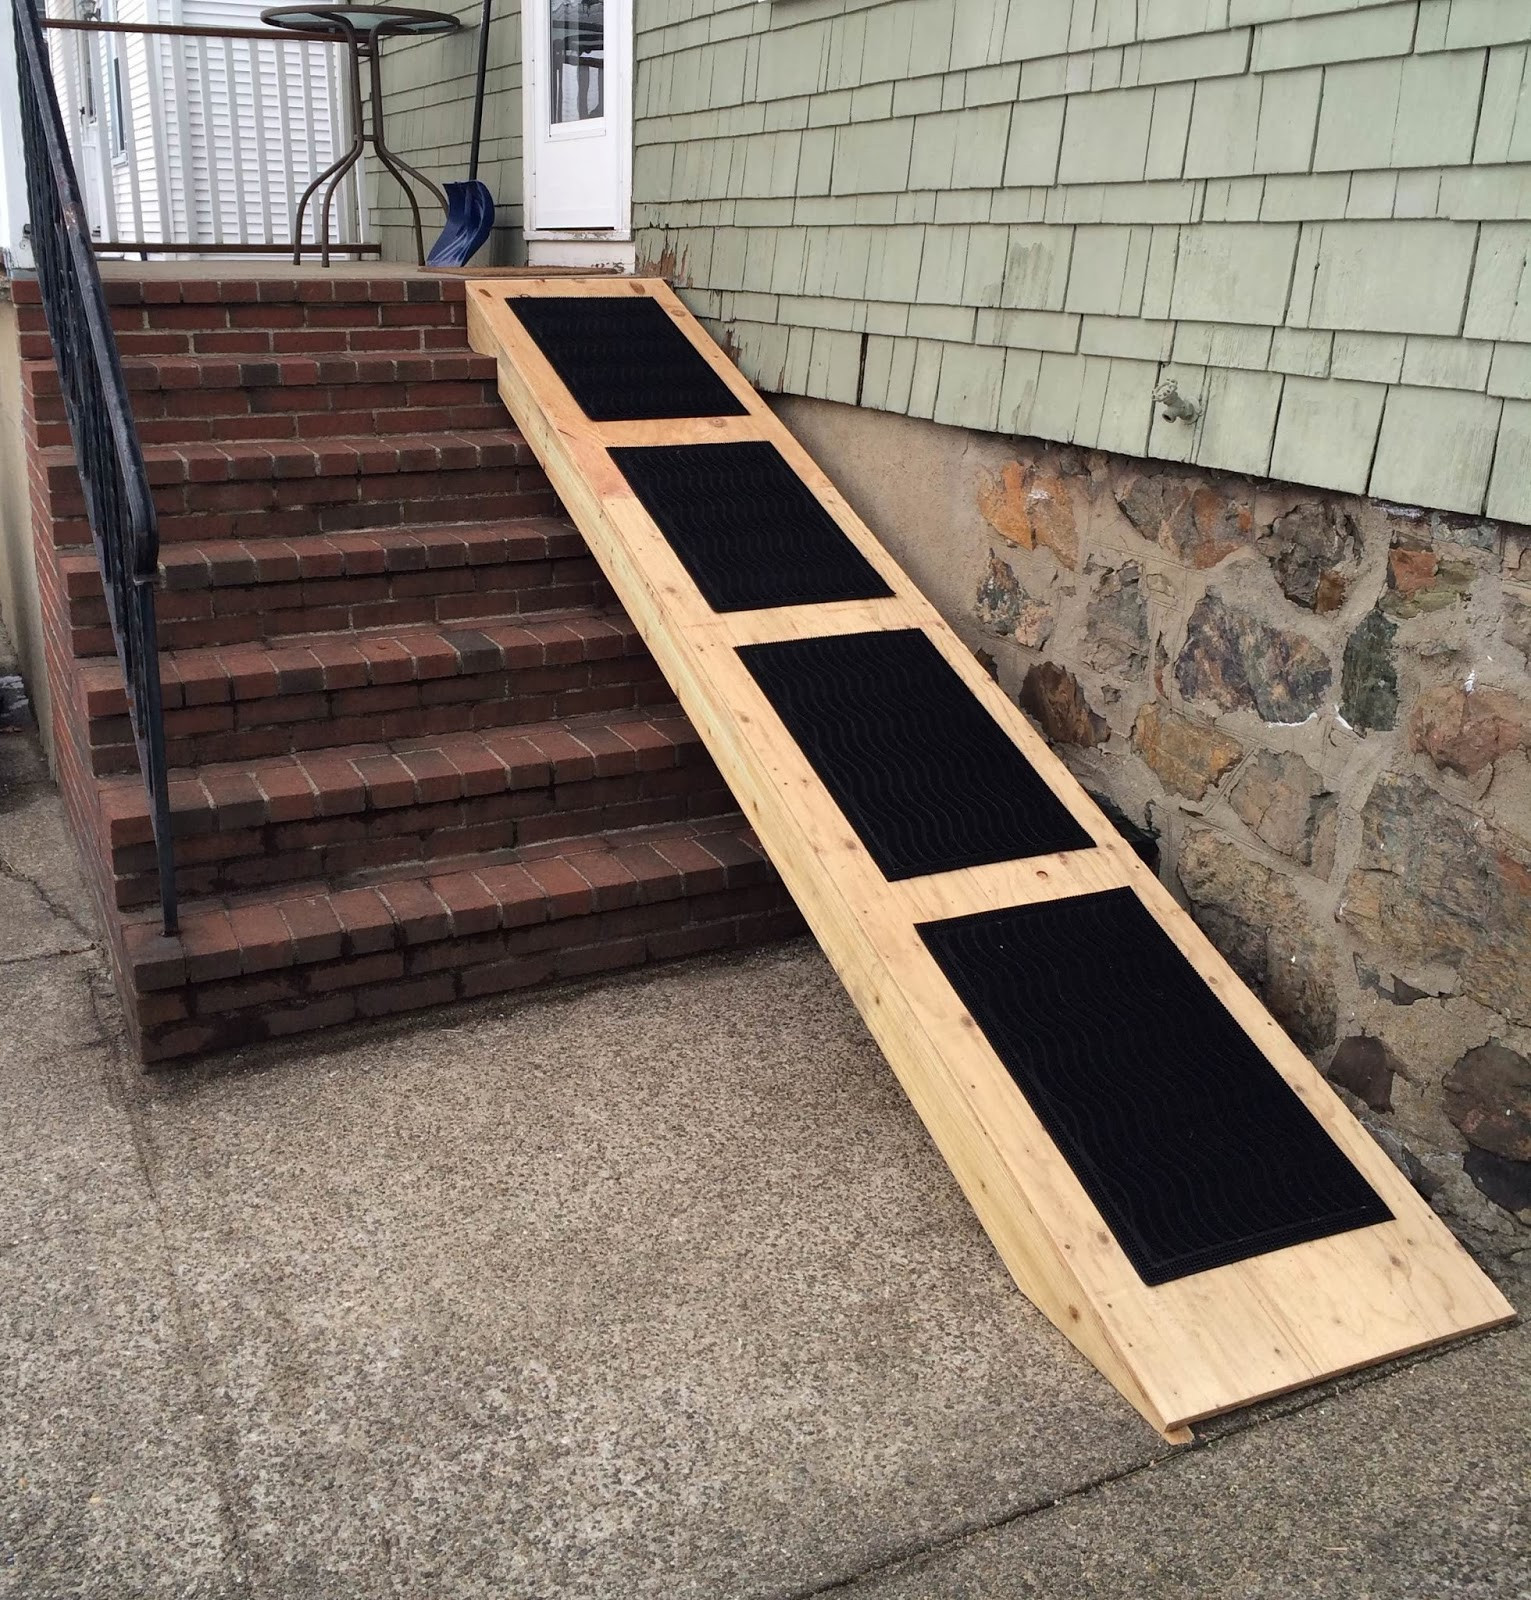 DIY Dog Ramp For Stairs
 Ramps